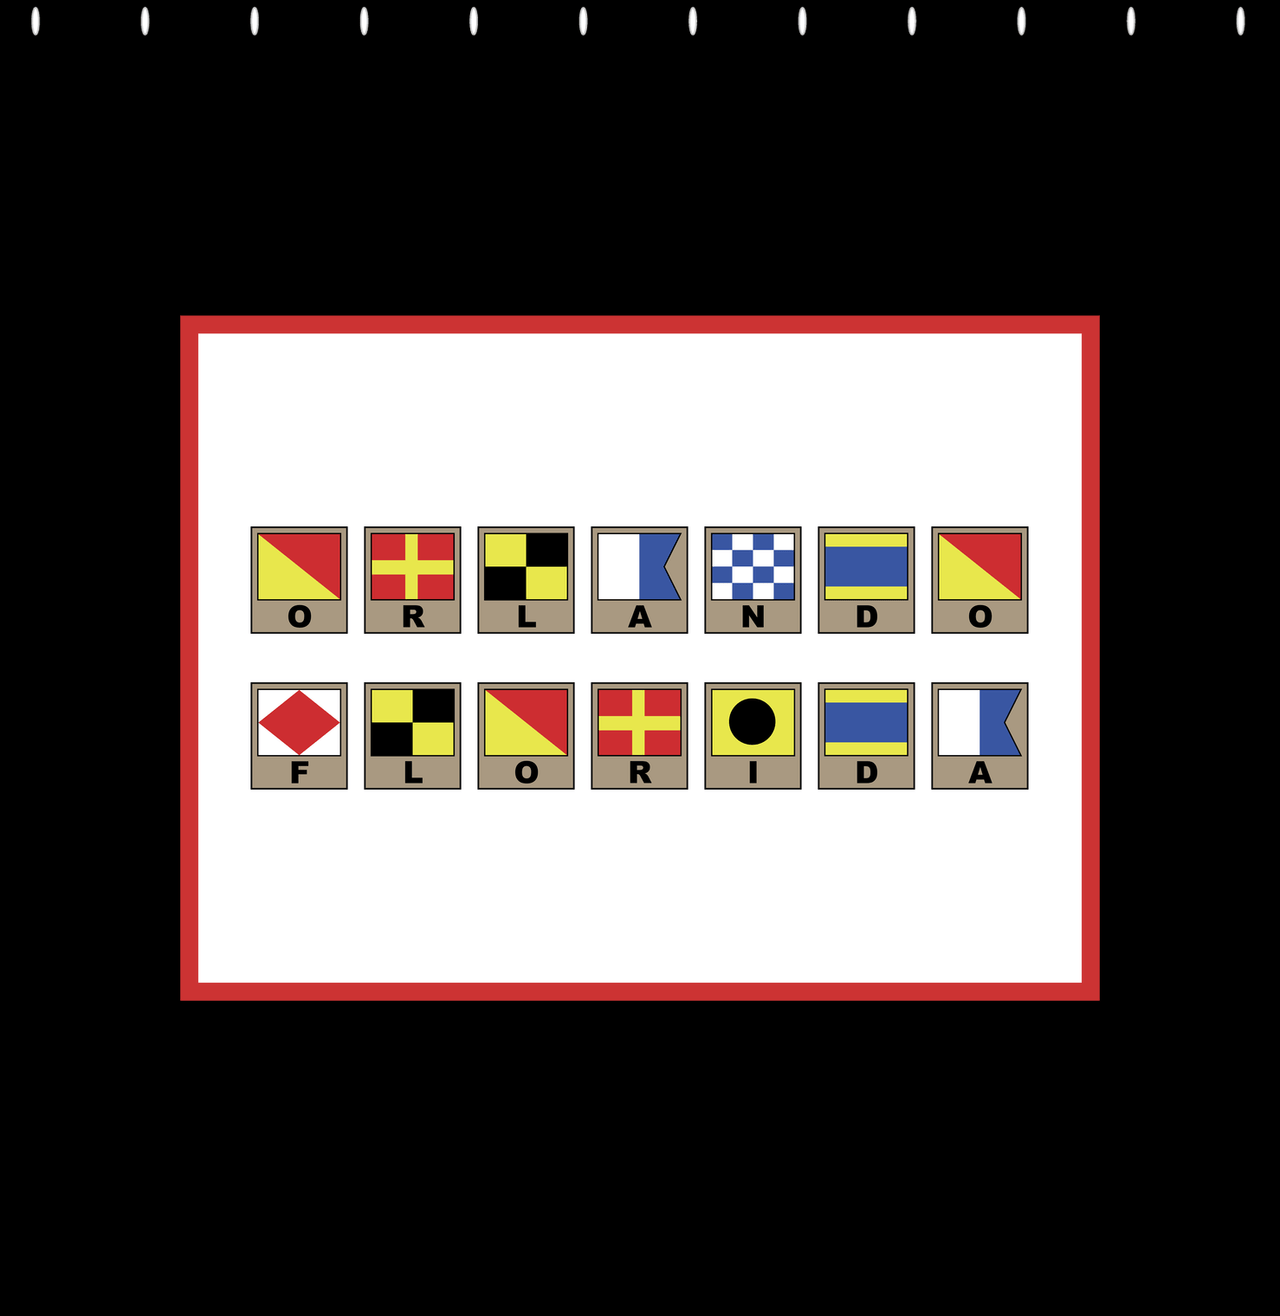 Personalized Nautical Flags Shower Curtain - Black and Red - Flags With Light Brown Frames - Decorate View